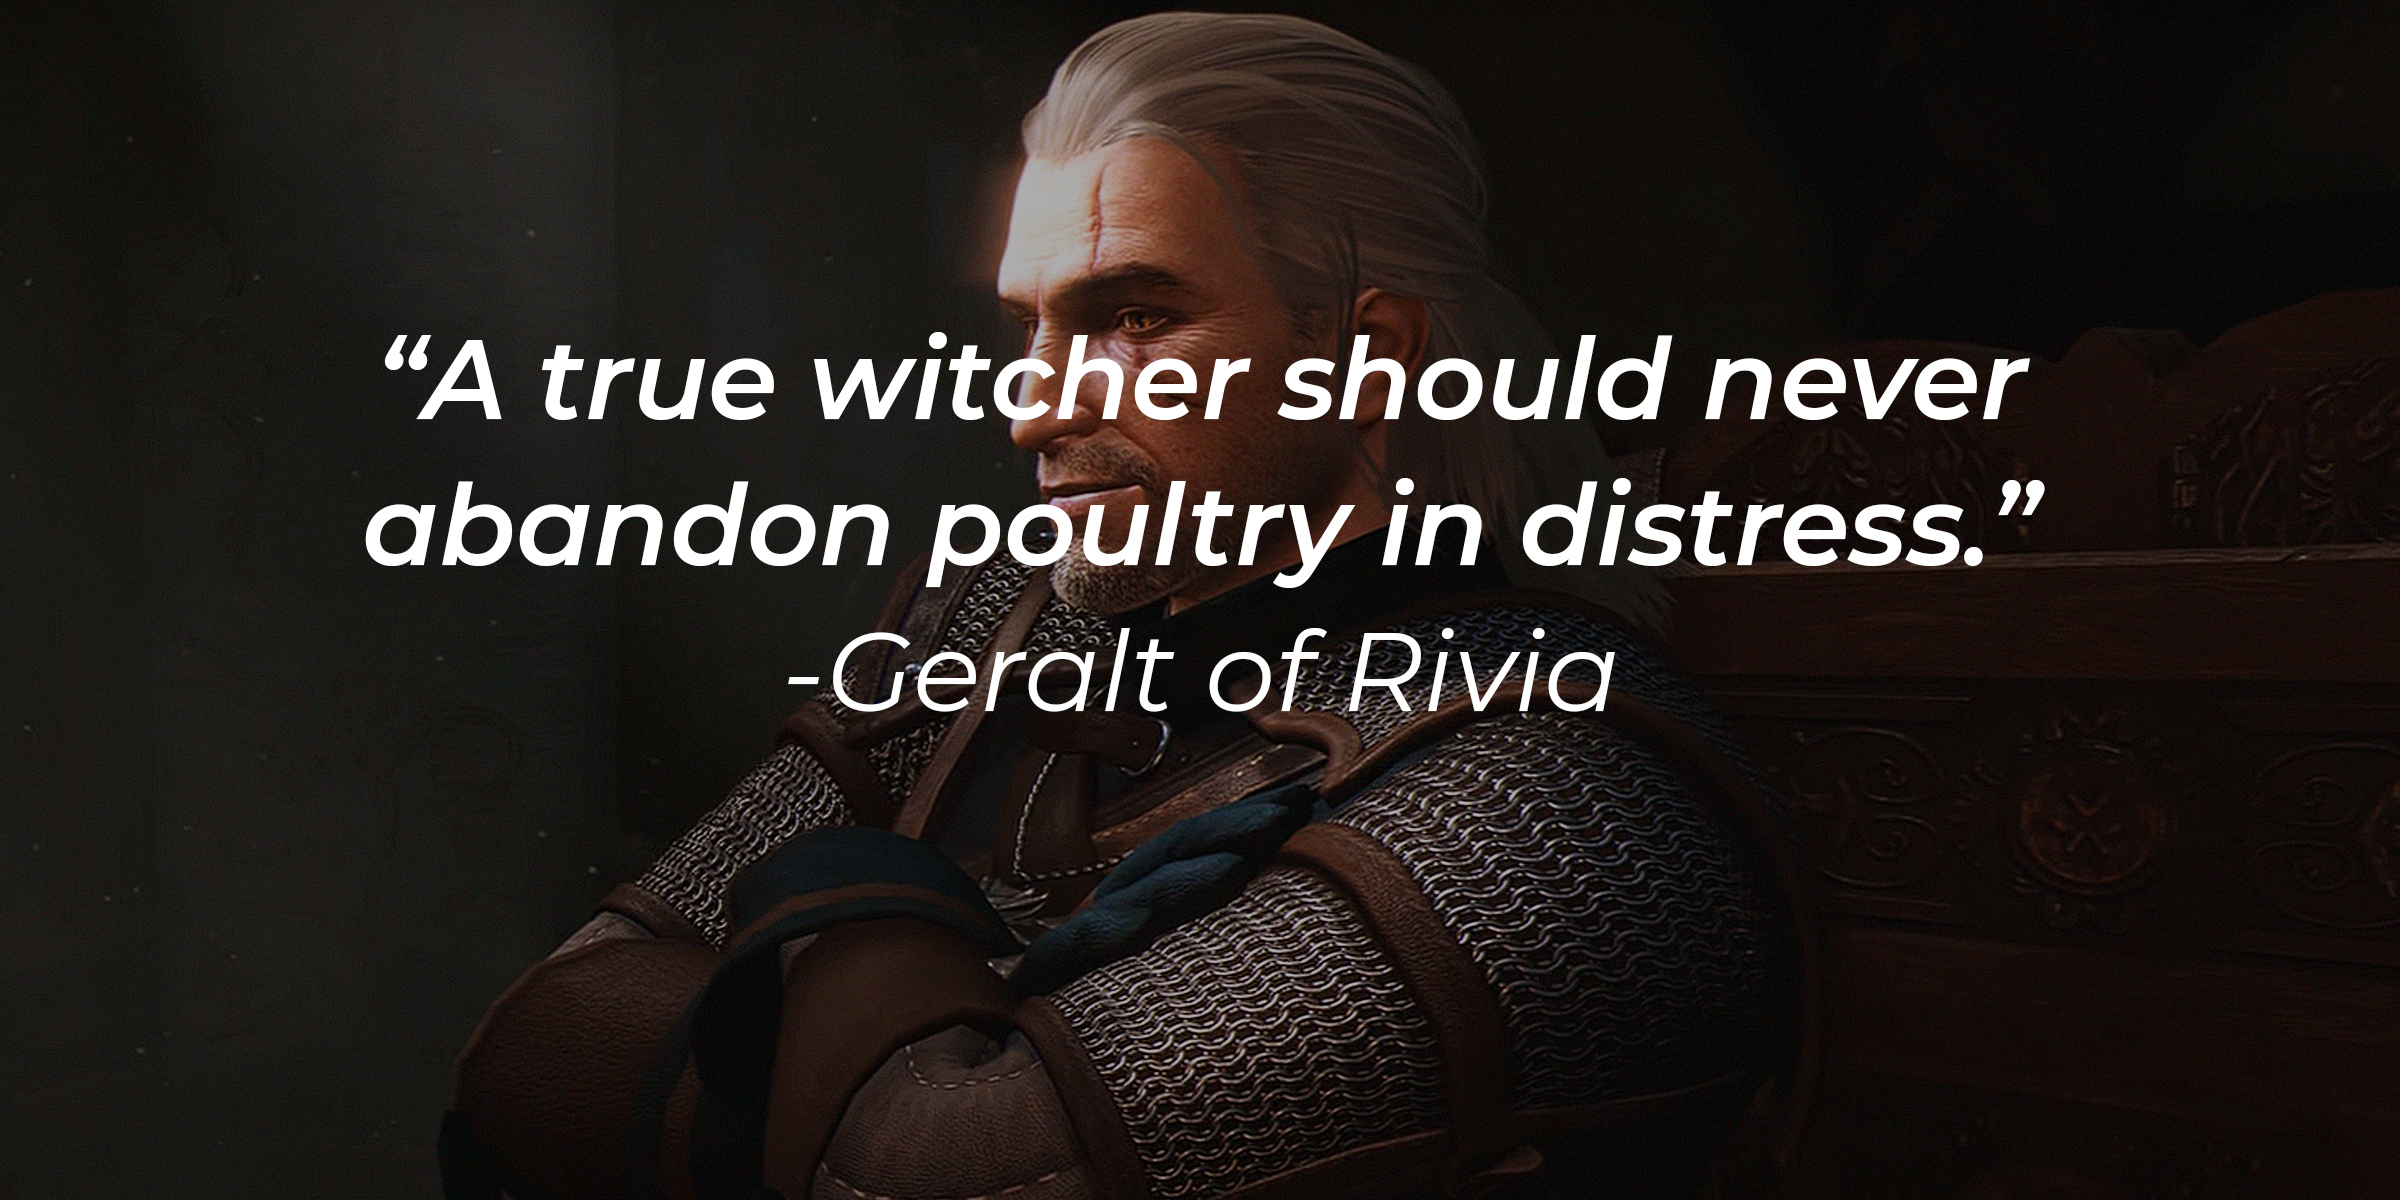 Geralt of Rivia from the video game with his quote: “A true witcher should never abandon poultry in distress.” | Source: youtube.com/thewitcher